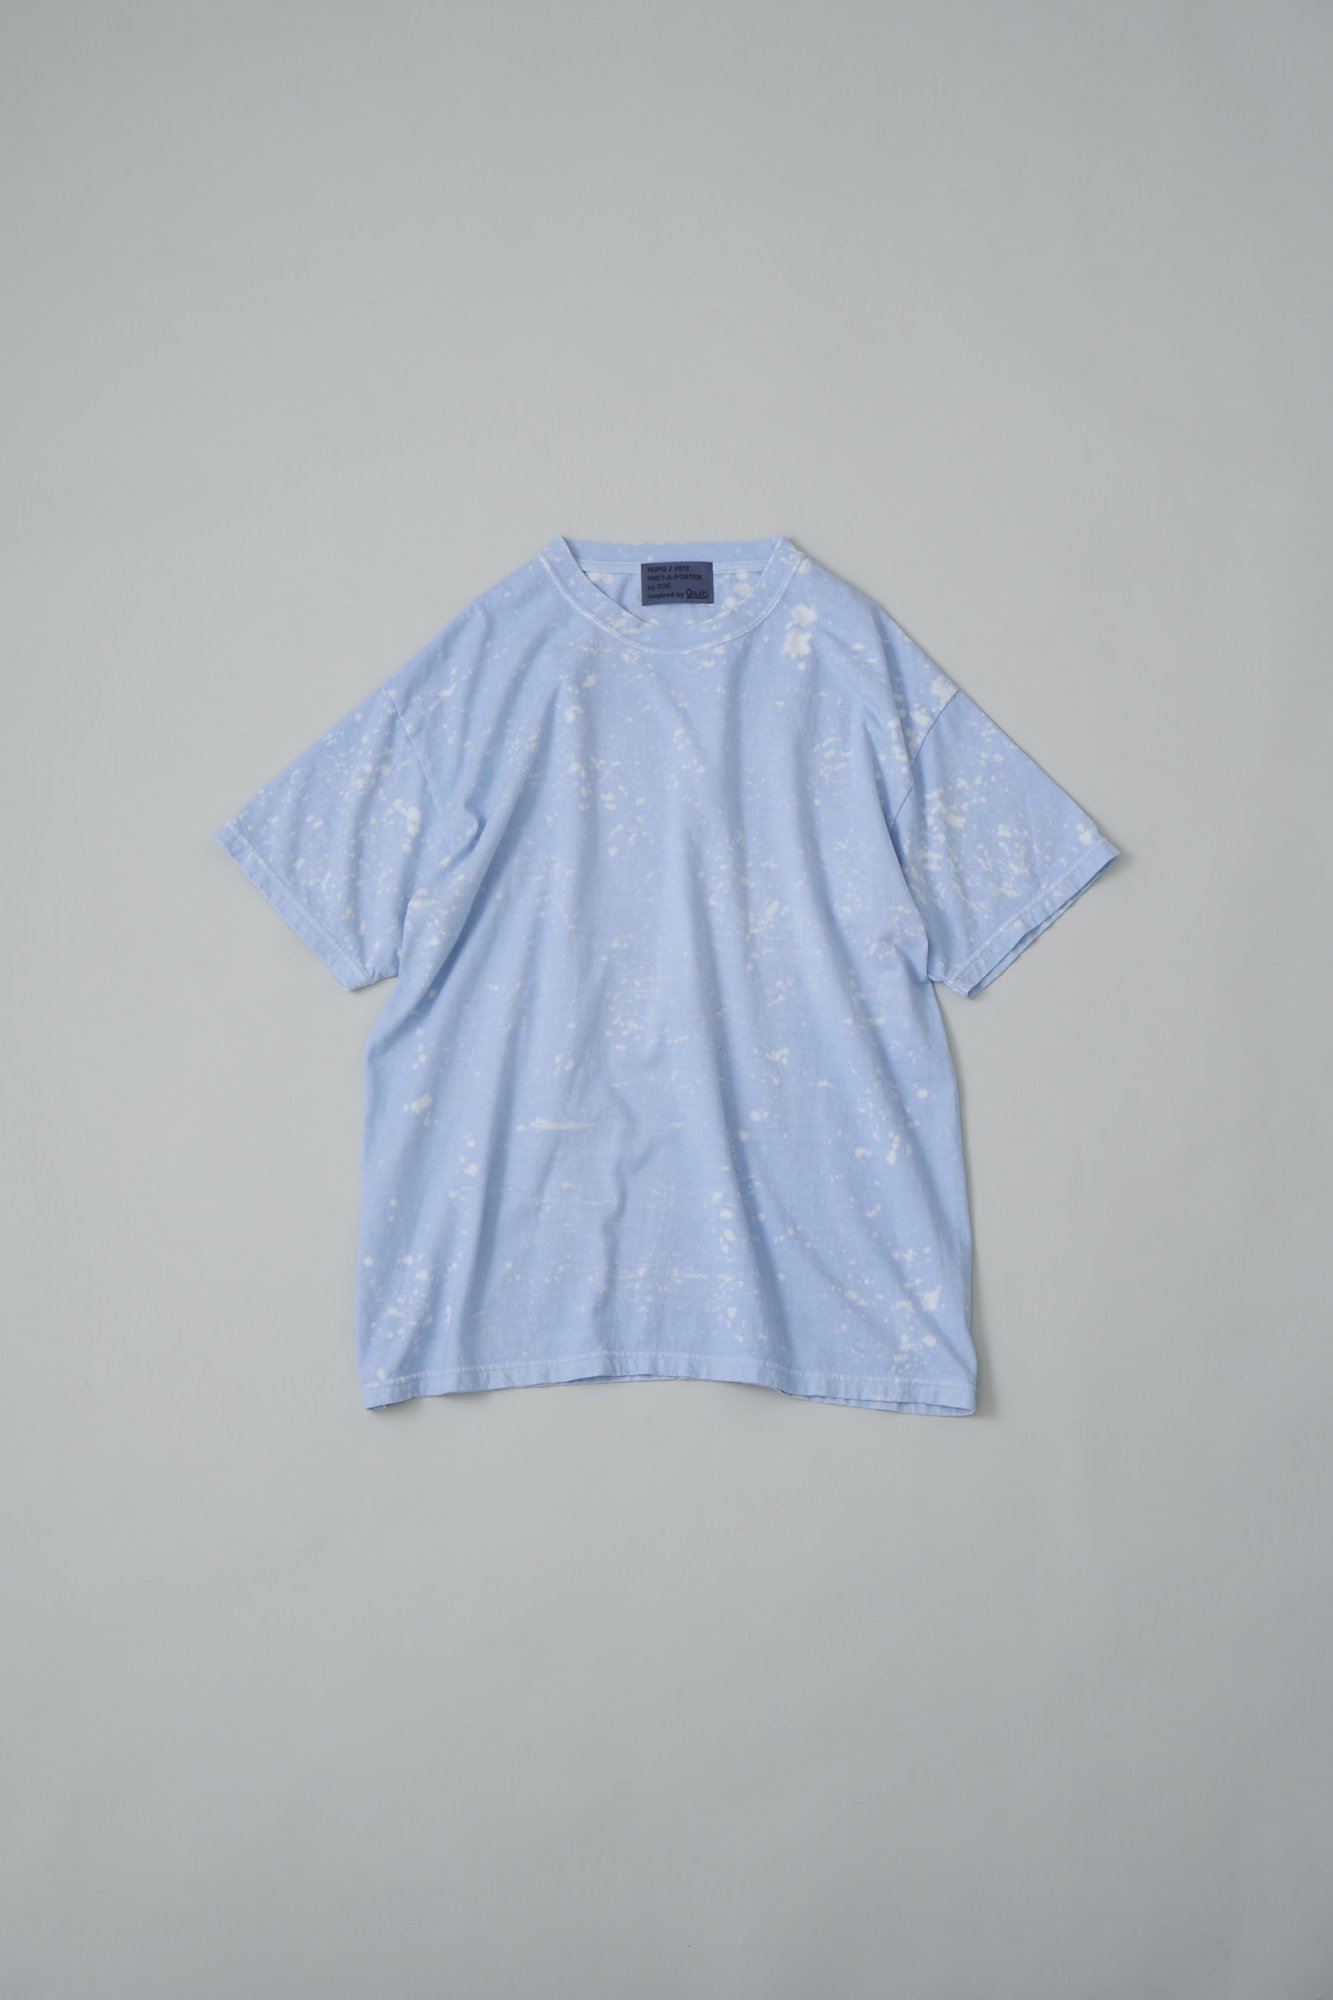 soe<br />Bleached T Shirts Not foe sale with AOR / SAX<img class='new_mark_img2' src='https://img.shop-pro.jp/img/new/icons14.gif' style='border:none;display:inline;margin:0px;padding:0px;width:auto;' />